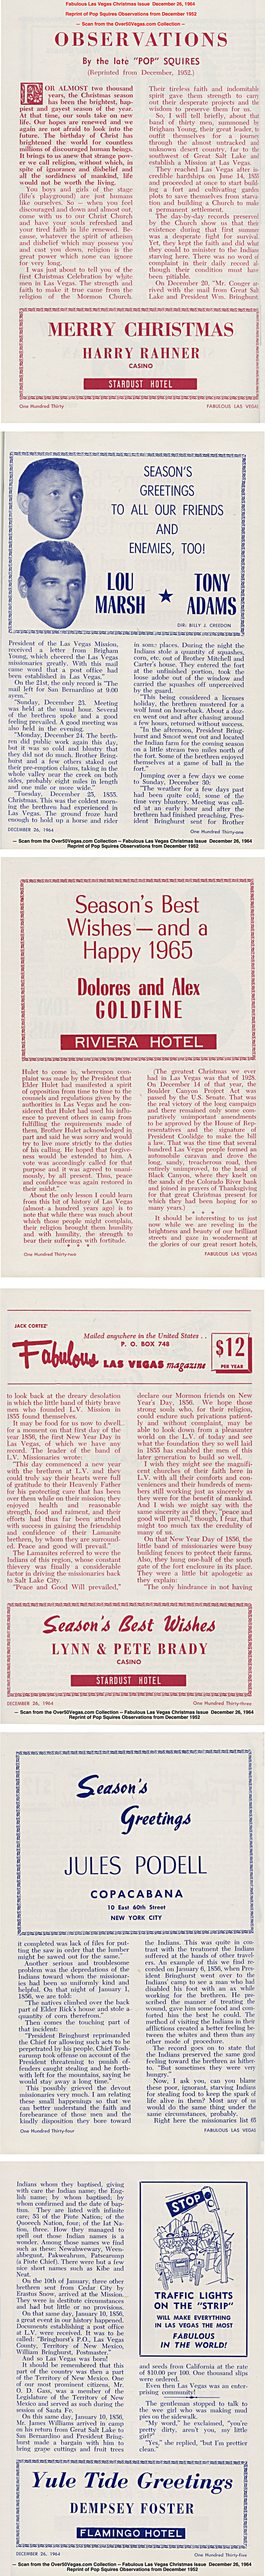  Fabulous Las Vegas Christmas Issue  December 26, 1964 
Reprint of Pop Squires Observations from December 1952